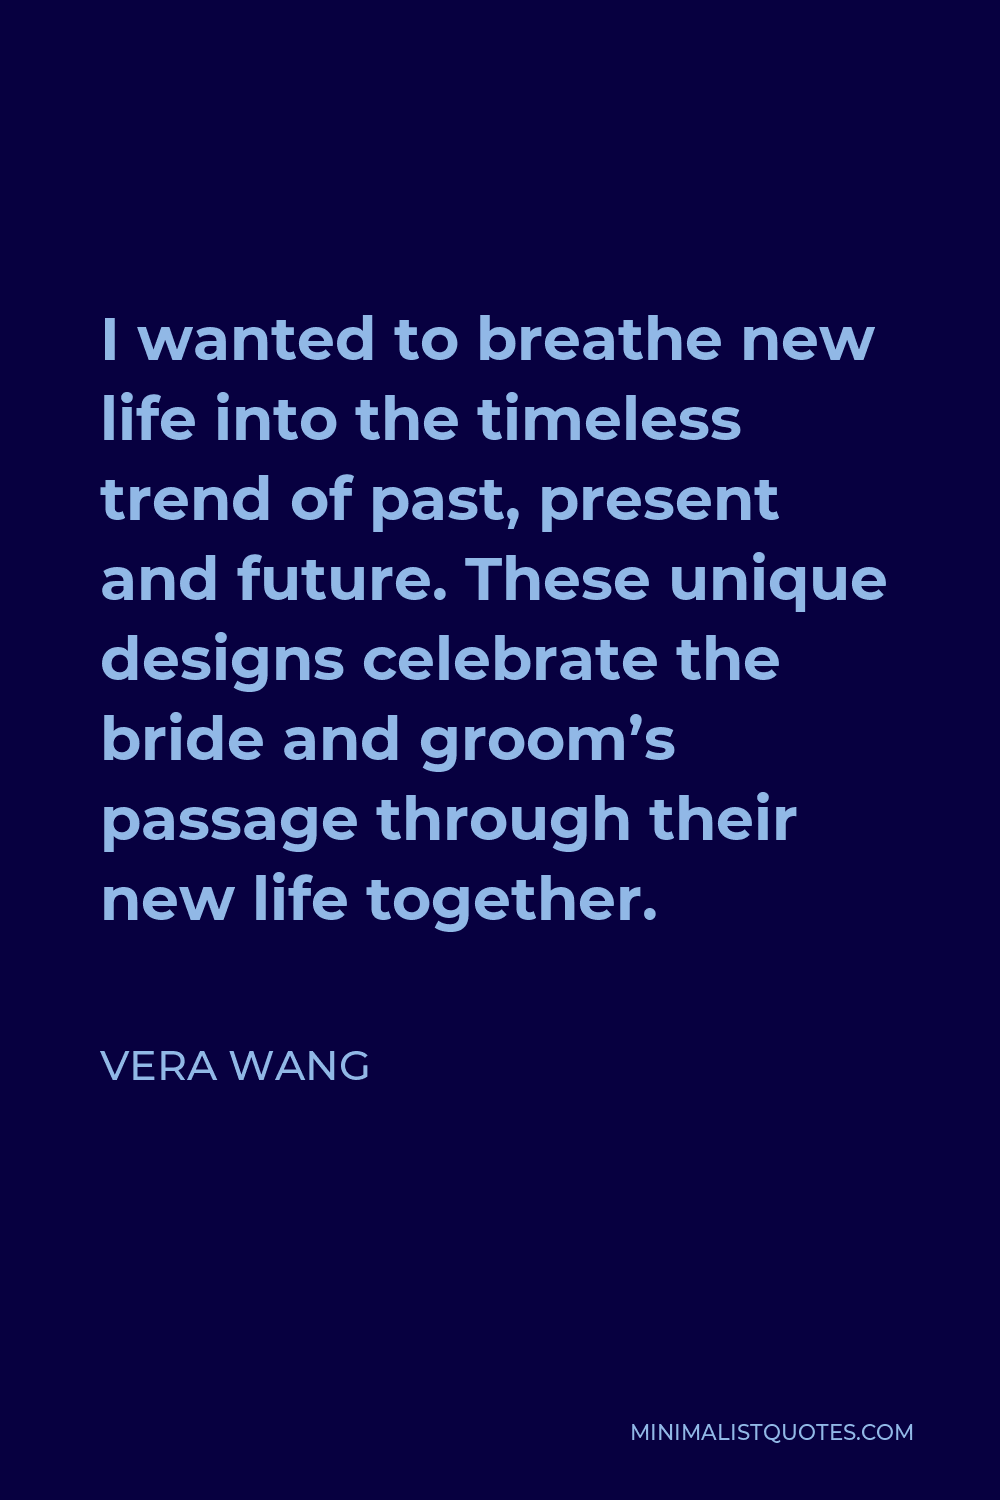 Vera Wang Quote: “I wanted to breathe new life into the timeless